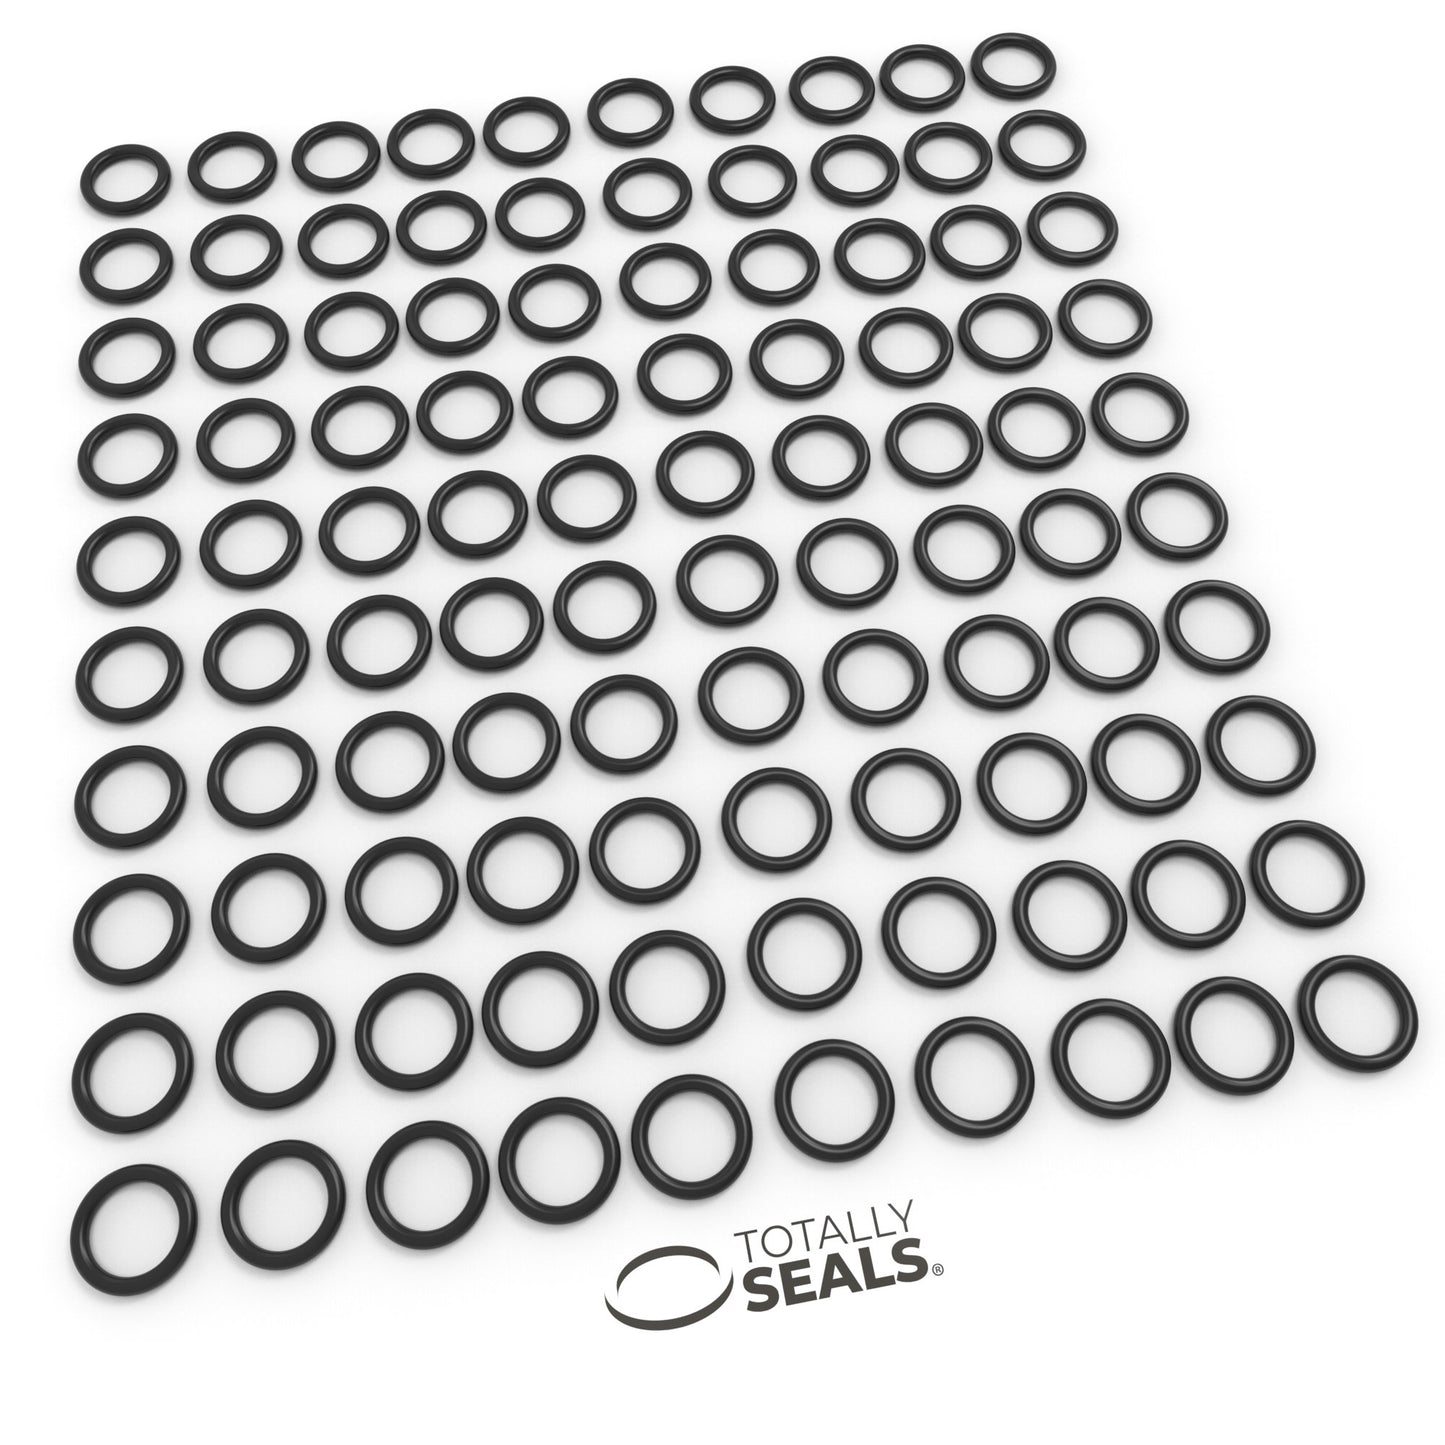 26mm x 3mm (32mm OD) Nitrile O-Rings - Totally Seals®